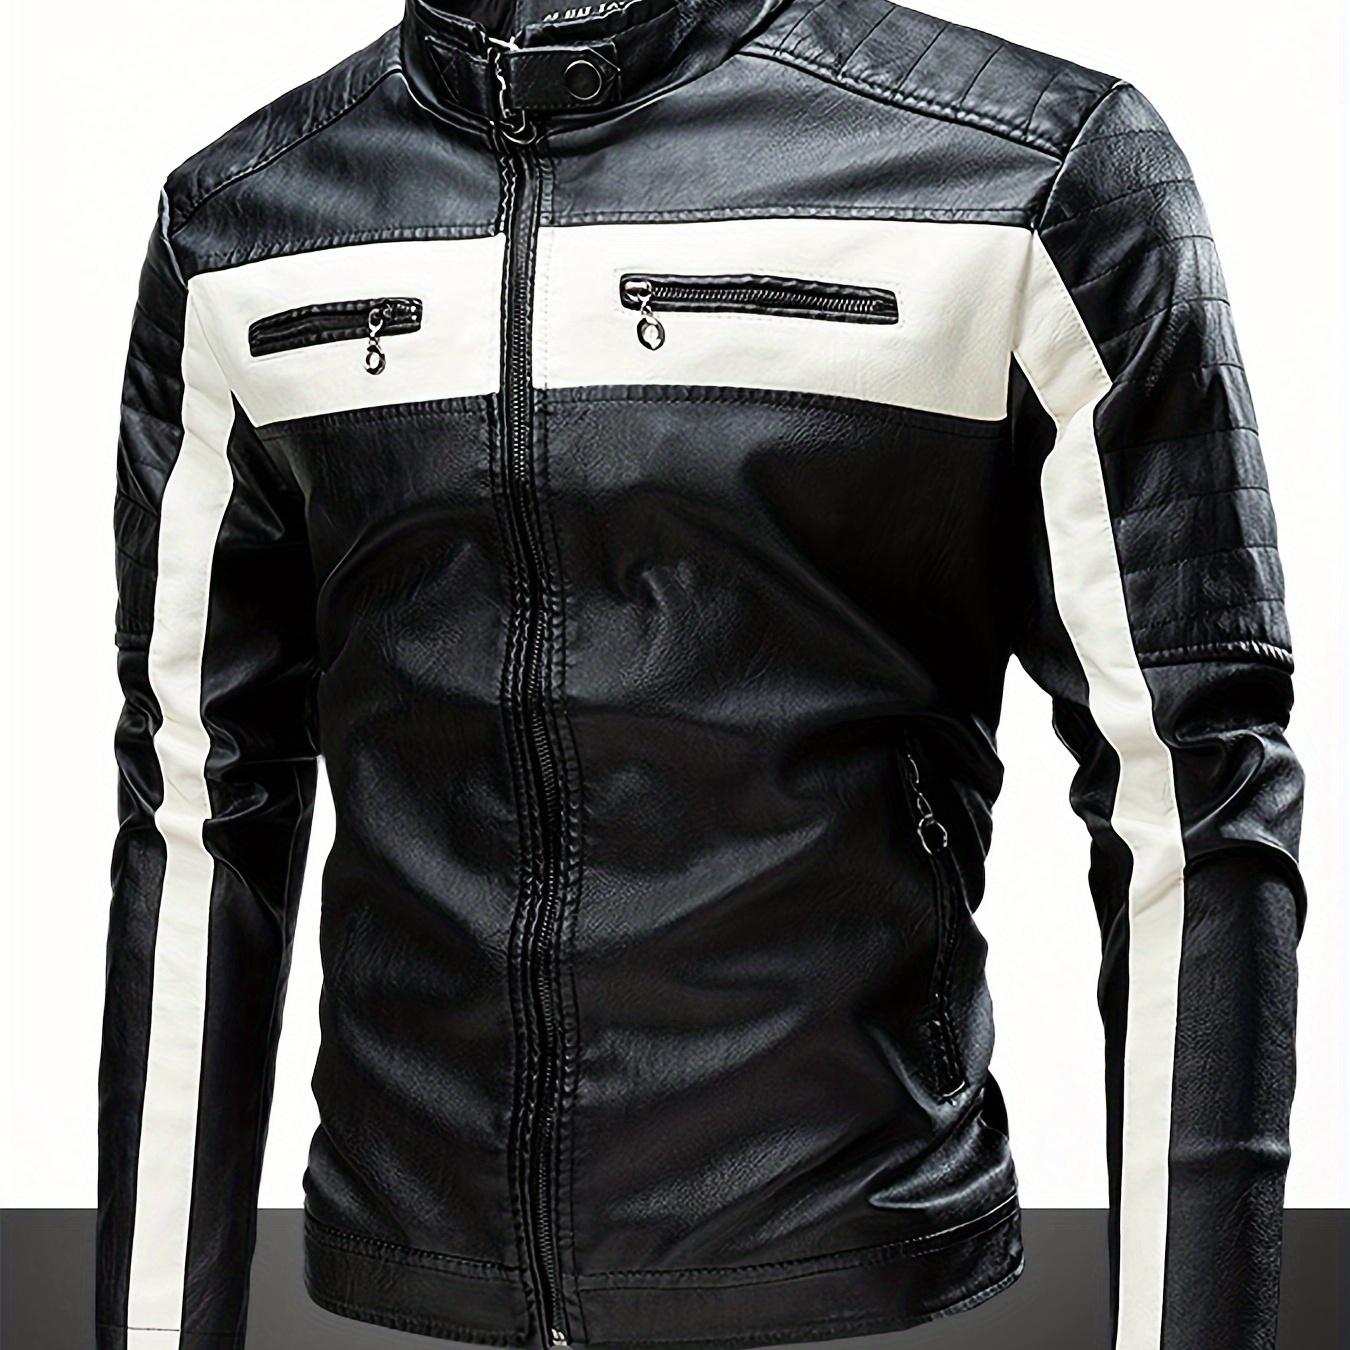 

Men's Casual Pu Leather Jacket, Chic Stand Collar Biker Jacket